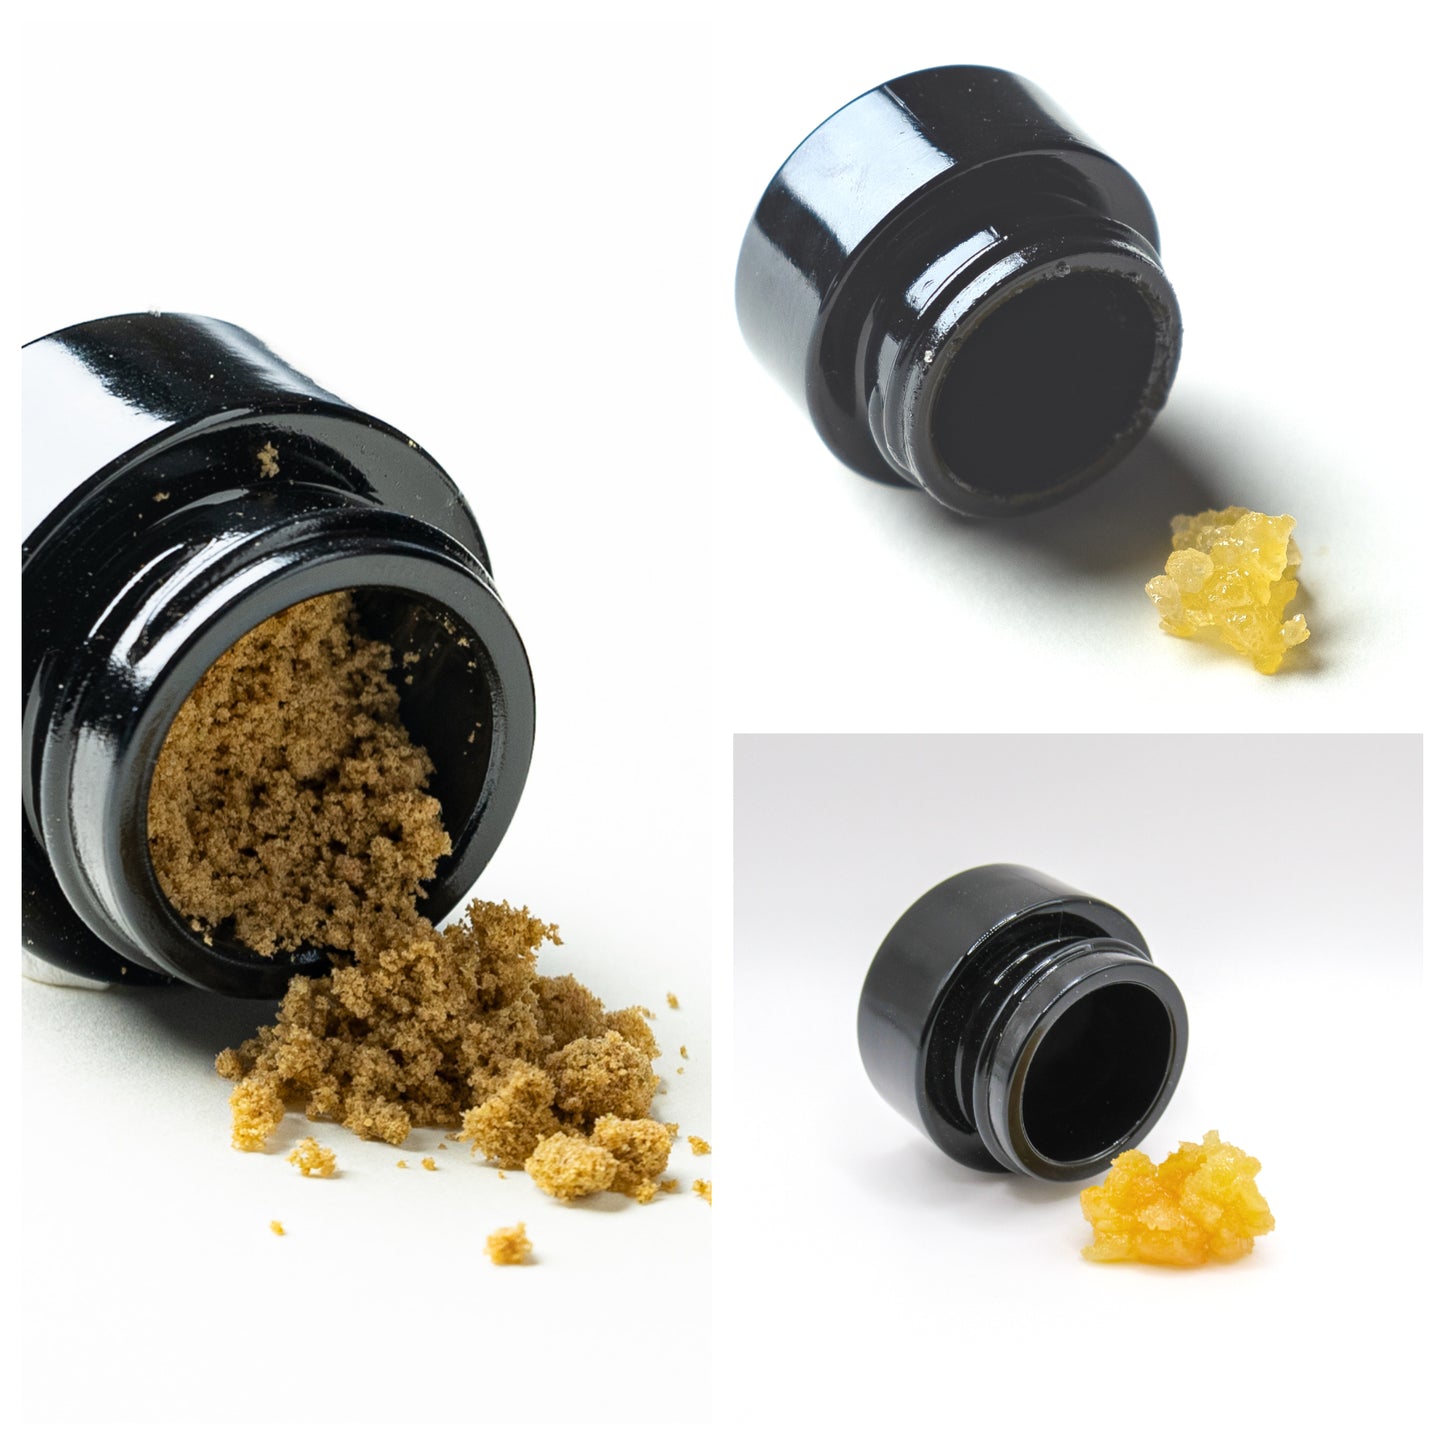 The Concentrate Lover